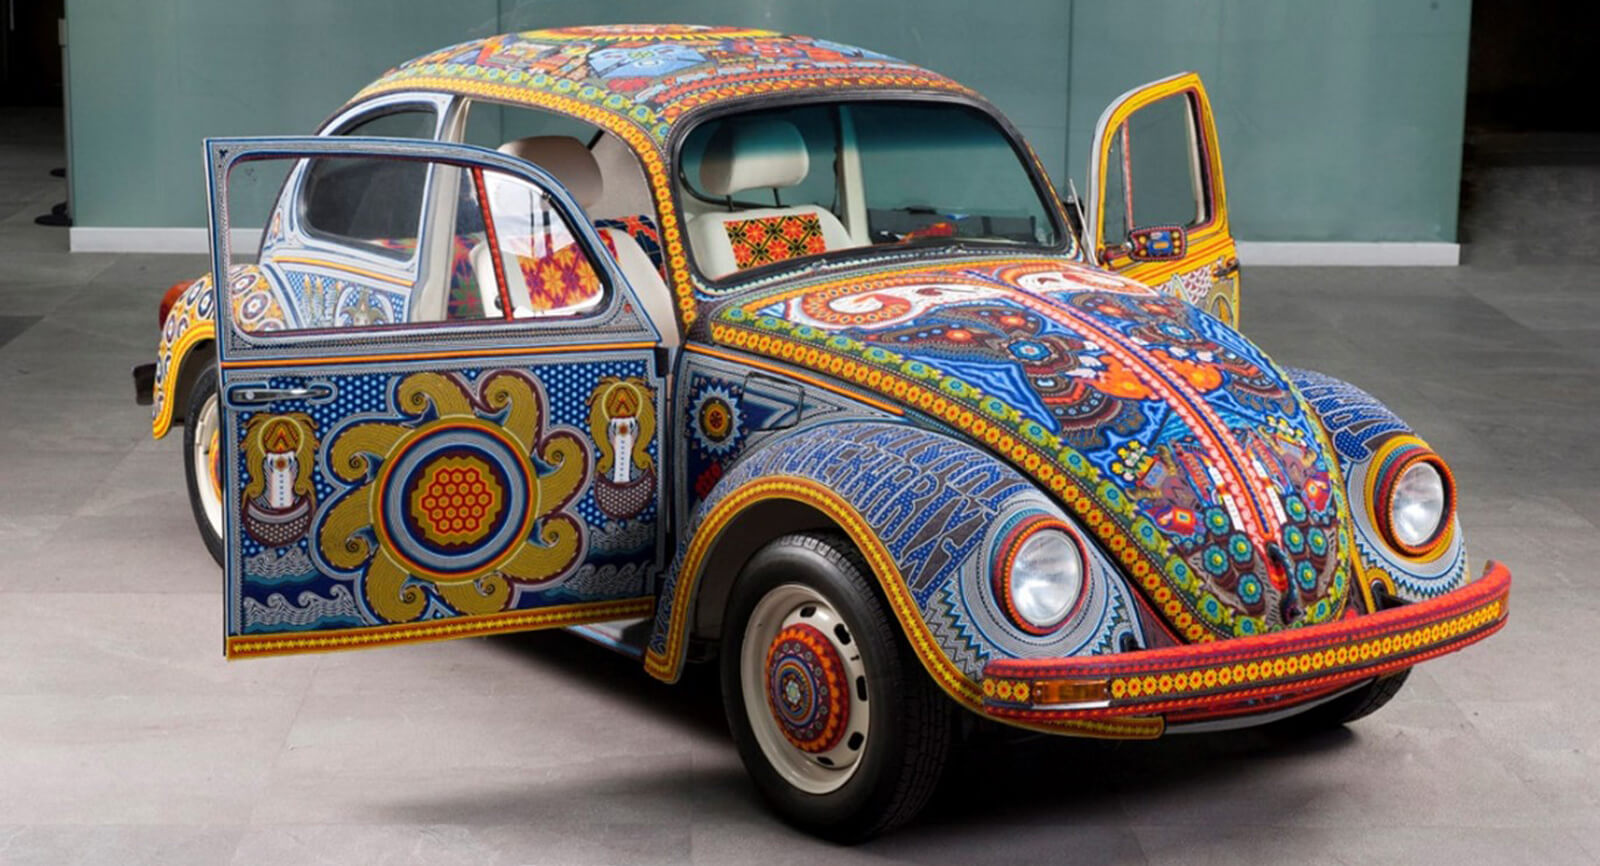 VW Beetle ‘Vochol’ Has Over 2M Beads, Took 9,000 Hours To